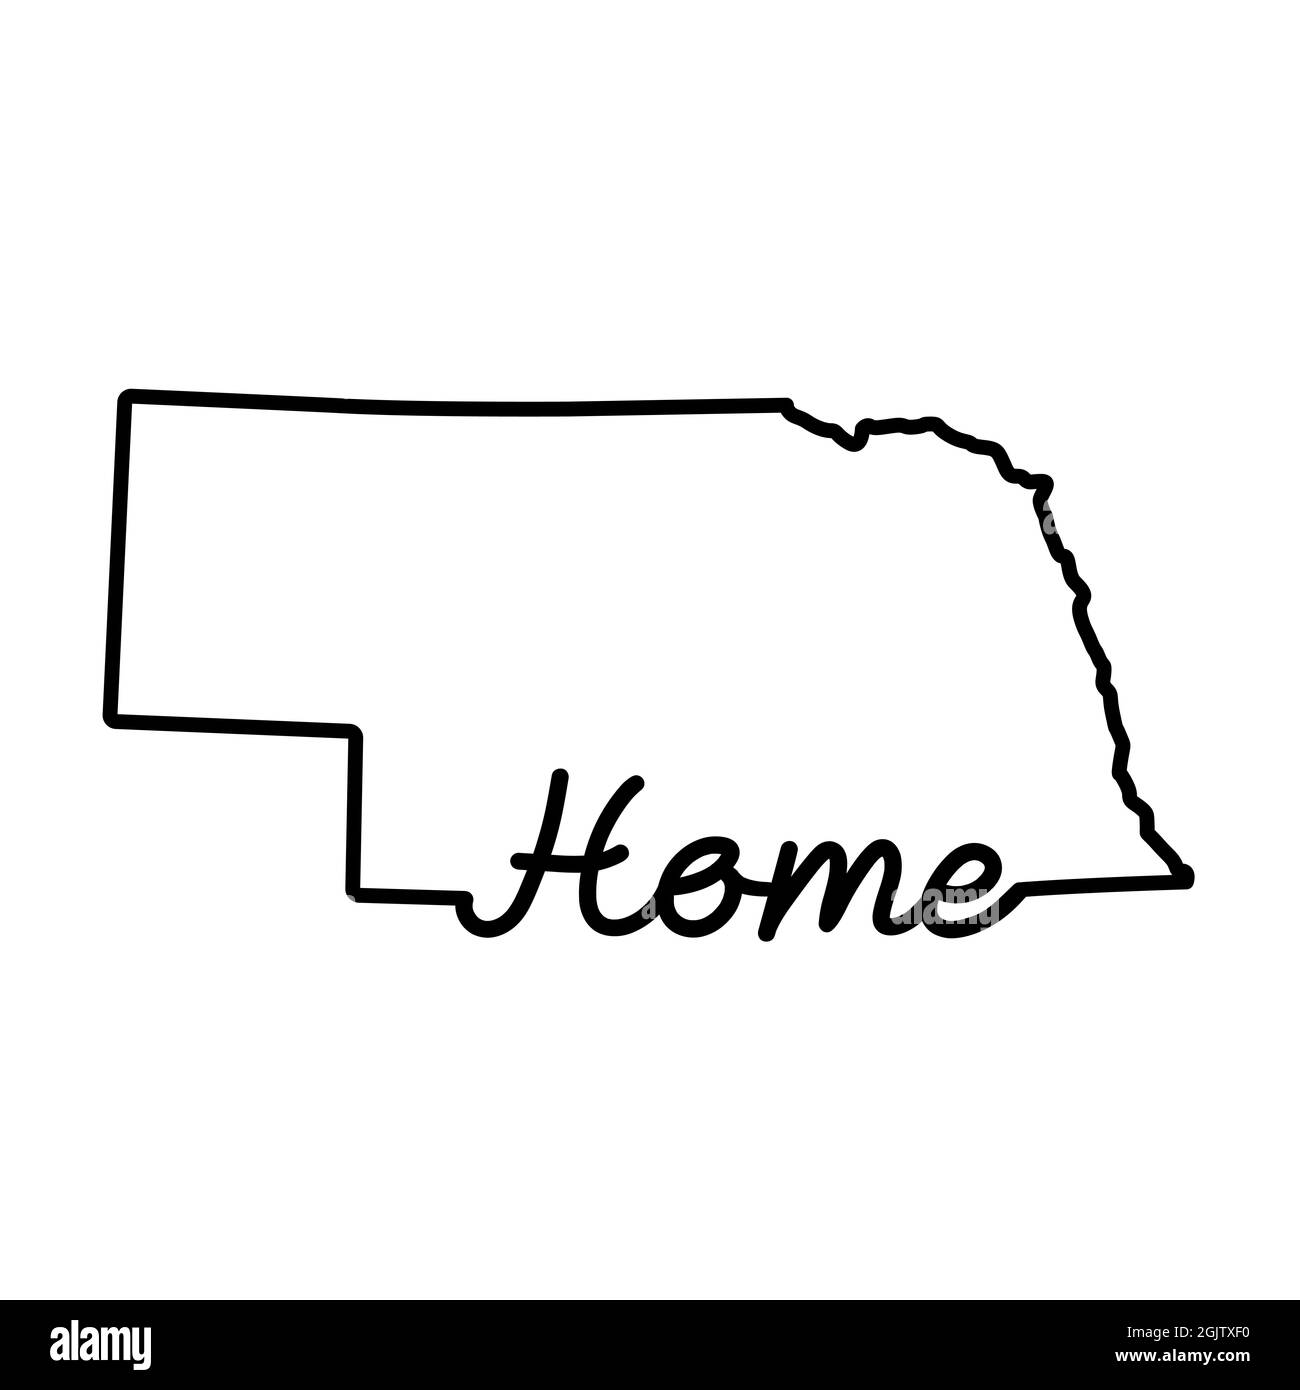 Nebraska Us State Outline Map With The Handwritten Home Word Continuous Line Drawing Of Patriotic Home Sign A Love For A Small Homeland Interior De 2GJTXF0 